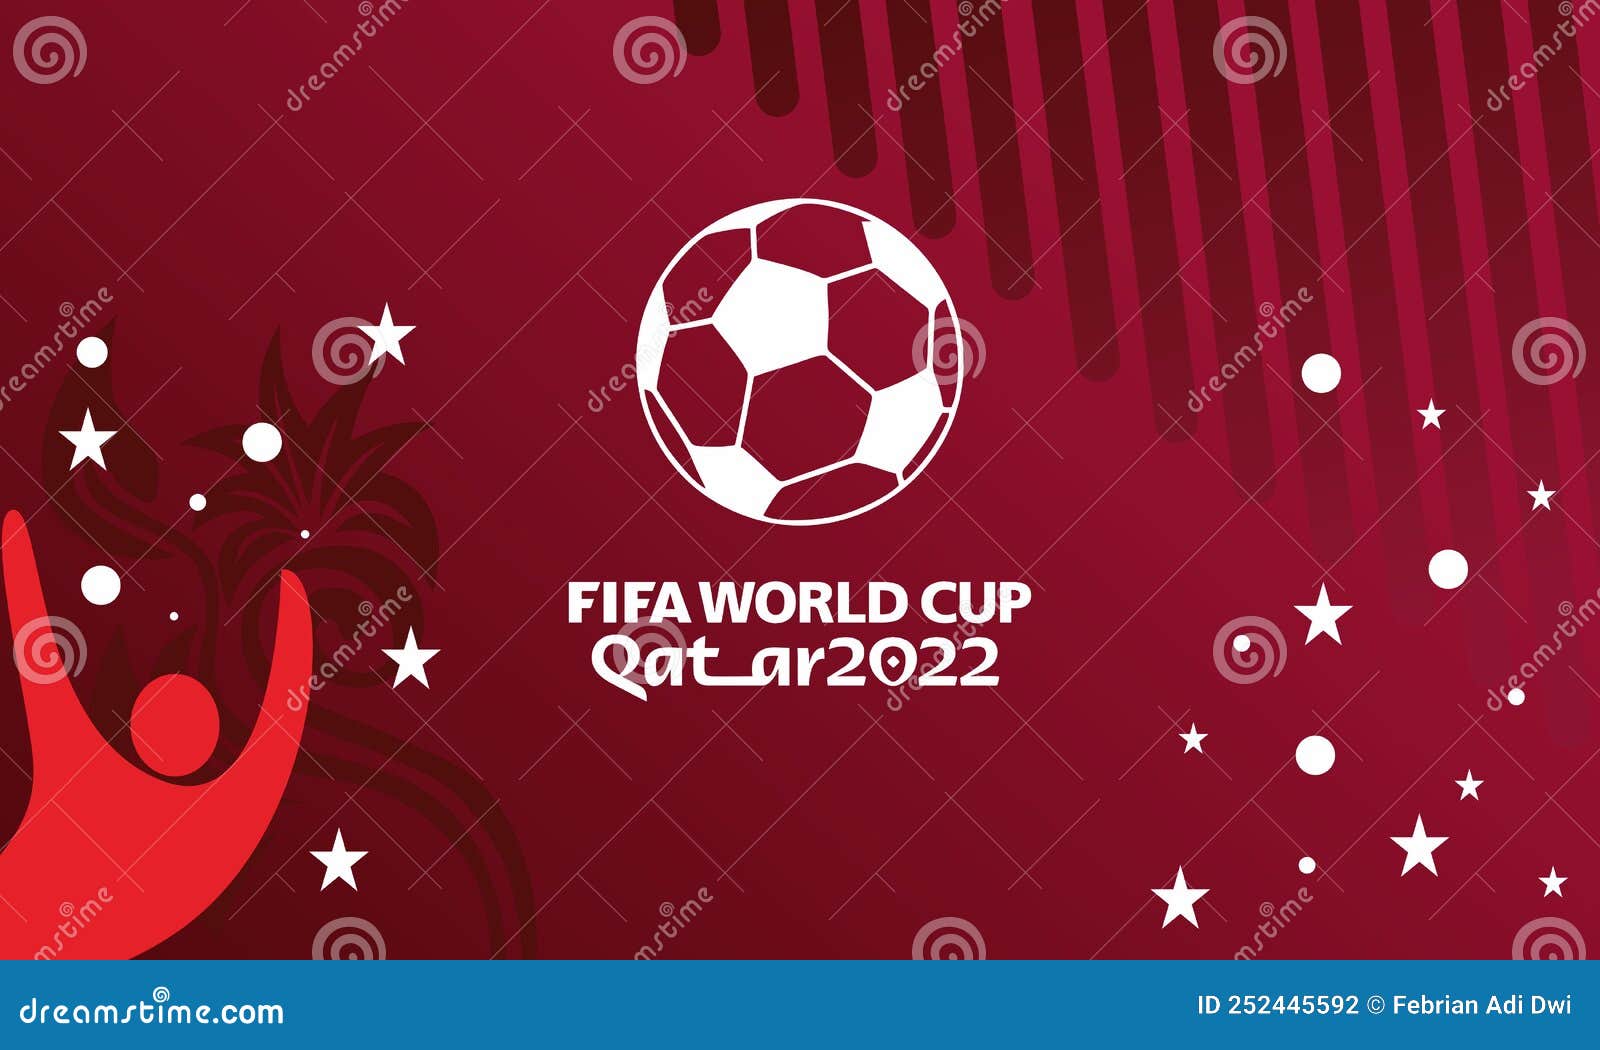 Background Design Football Tournament, Football Cup, Template, Vector  Illustration, World Cup Qatar 2022 Stock Vector - Illustration of icon,  design: 252445592